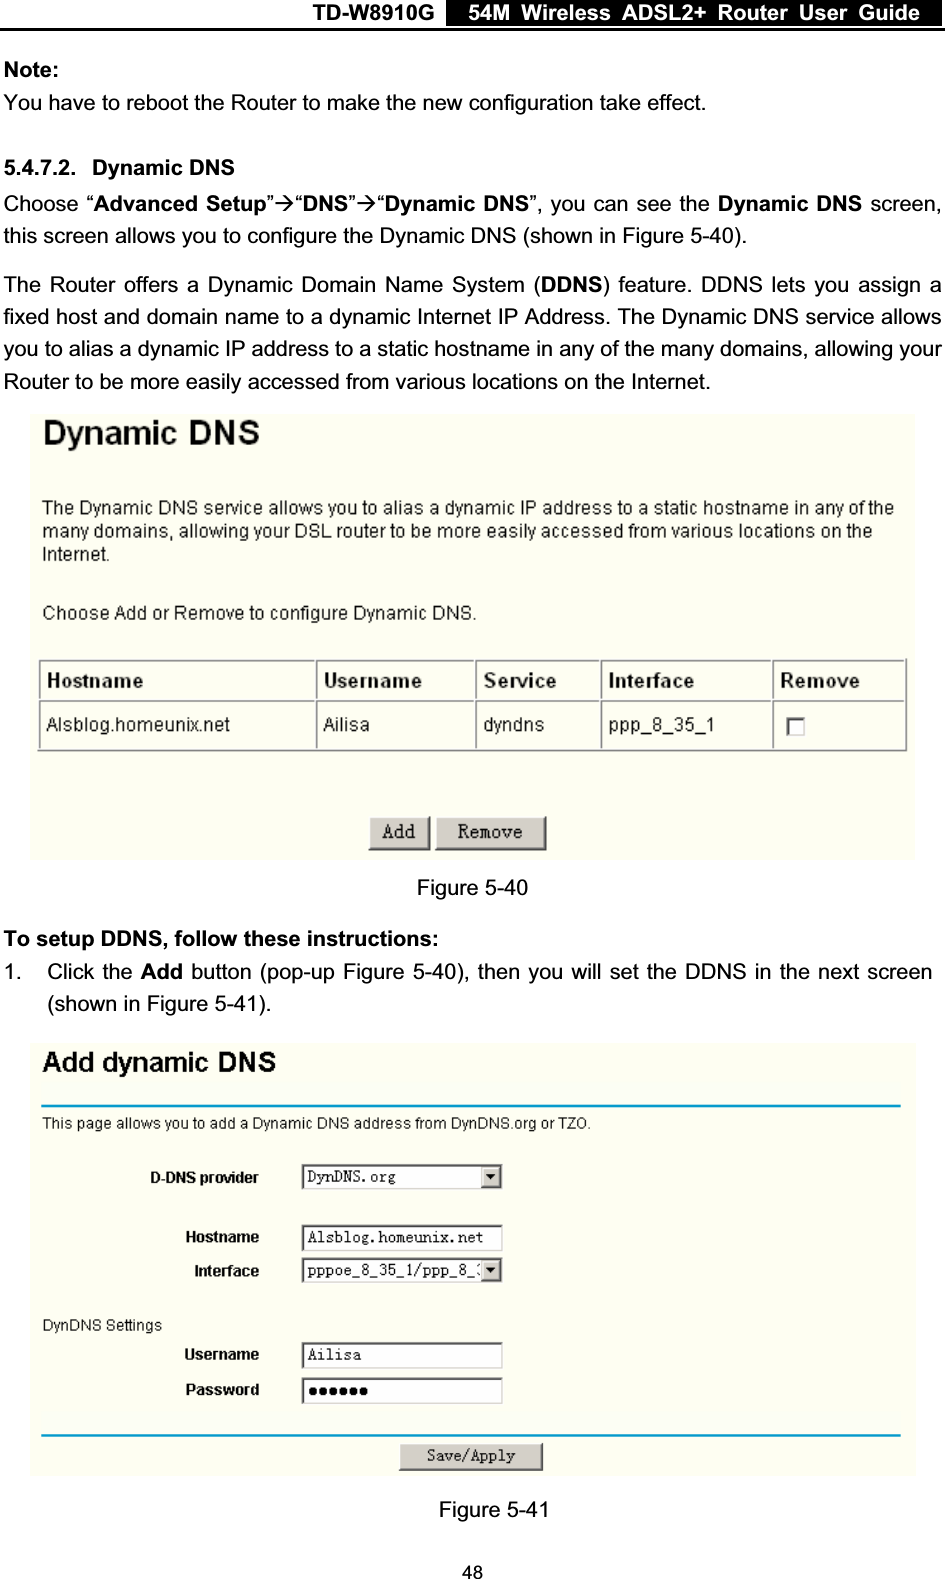 TD-W8910G    54M Wireless ADSL2+ Router User Guide  Note:You have to reboot the Router to make the new configuration take effect. 5.4.7.2. Dynamic DNS Choose “Advanced Setup”Æ“DNS”Æ“Dynamic DNS”, you can see the Dynamic DNS screen, this screen allows you to configure the Dynamic DNS (shown in Figure 5-40).The Router offers a Dynamic Domain Name System (DDNS) feature. DDNS lets you assign a fixed host and domain name to a dynamic Internet IP Address. The Dynamic DNS service allows you to alias a dynamic IP address to a static hostname in any of the many domains, allowing your Router to be more easily accessed from various locations on the Internet. Figure 5-40 To setup DDNS, follow these instructions: 1. Click the Add button (pop-up Figure 5-40), then you will set the DDNS in the next screen (shown in Figure 5-41).Figure 5-41  48